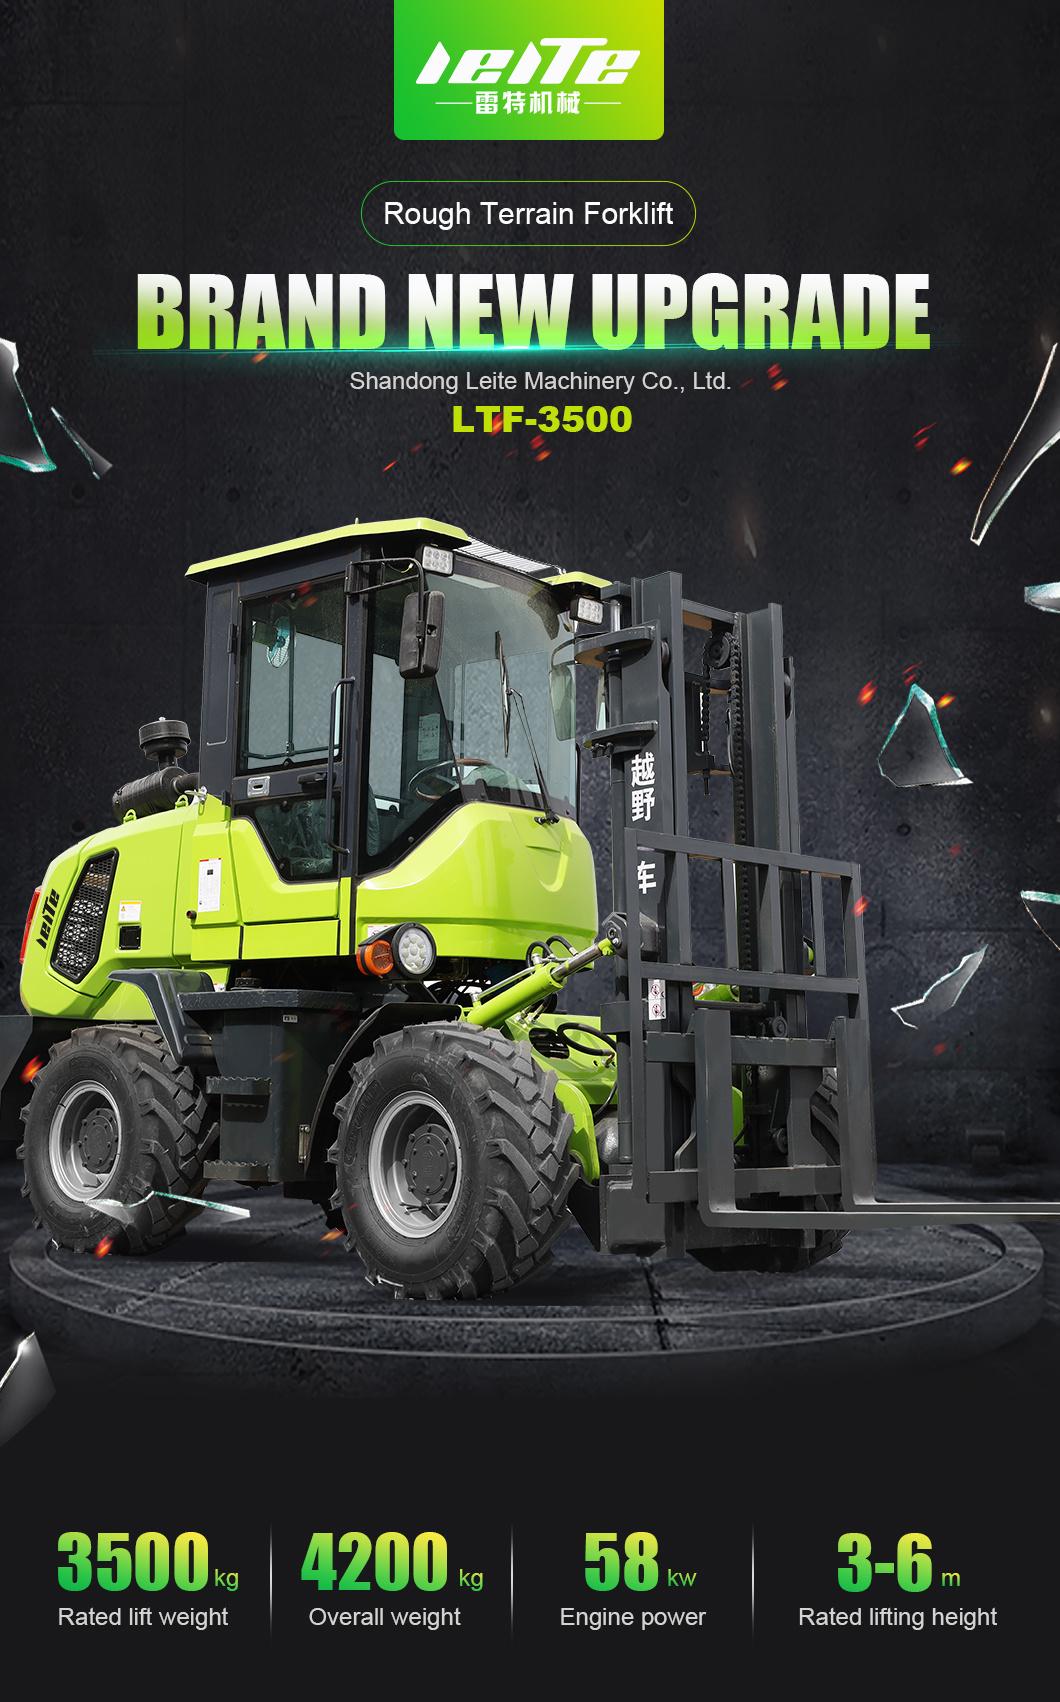 Terrain Forklift Articulated Frame off-Road 3.5 Ton 5 Ton Rough Terrain Forklift Cheap Price